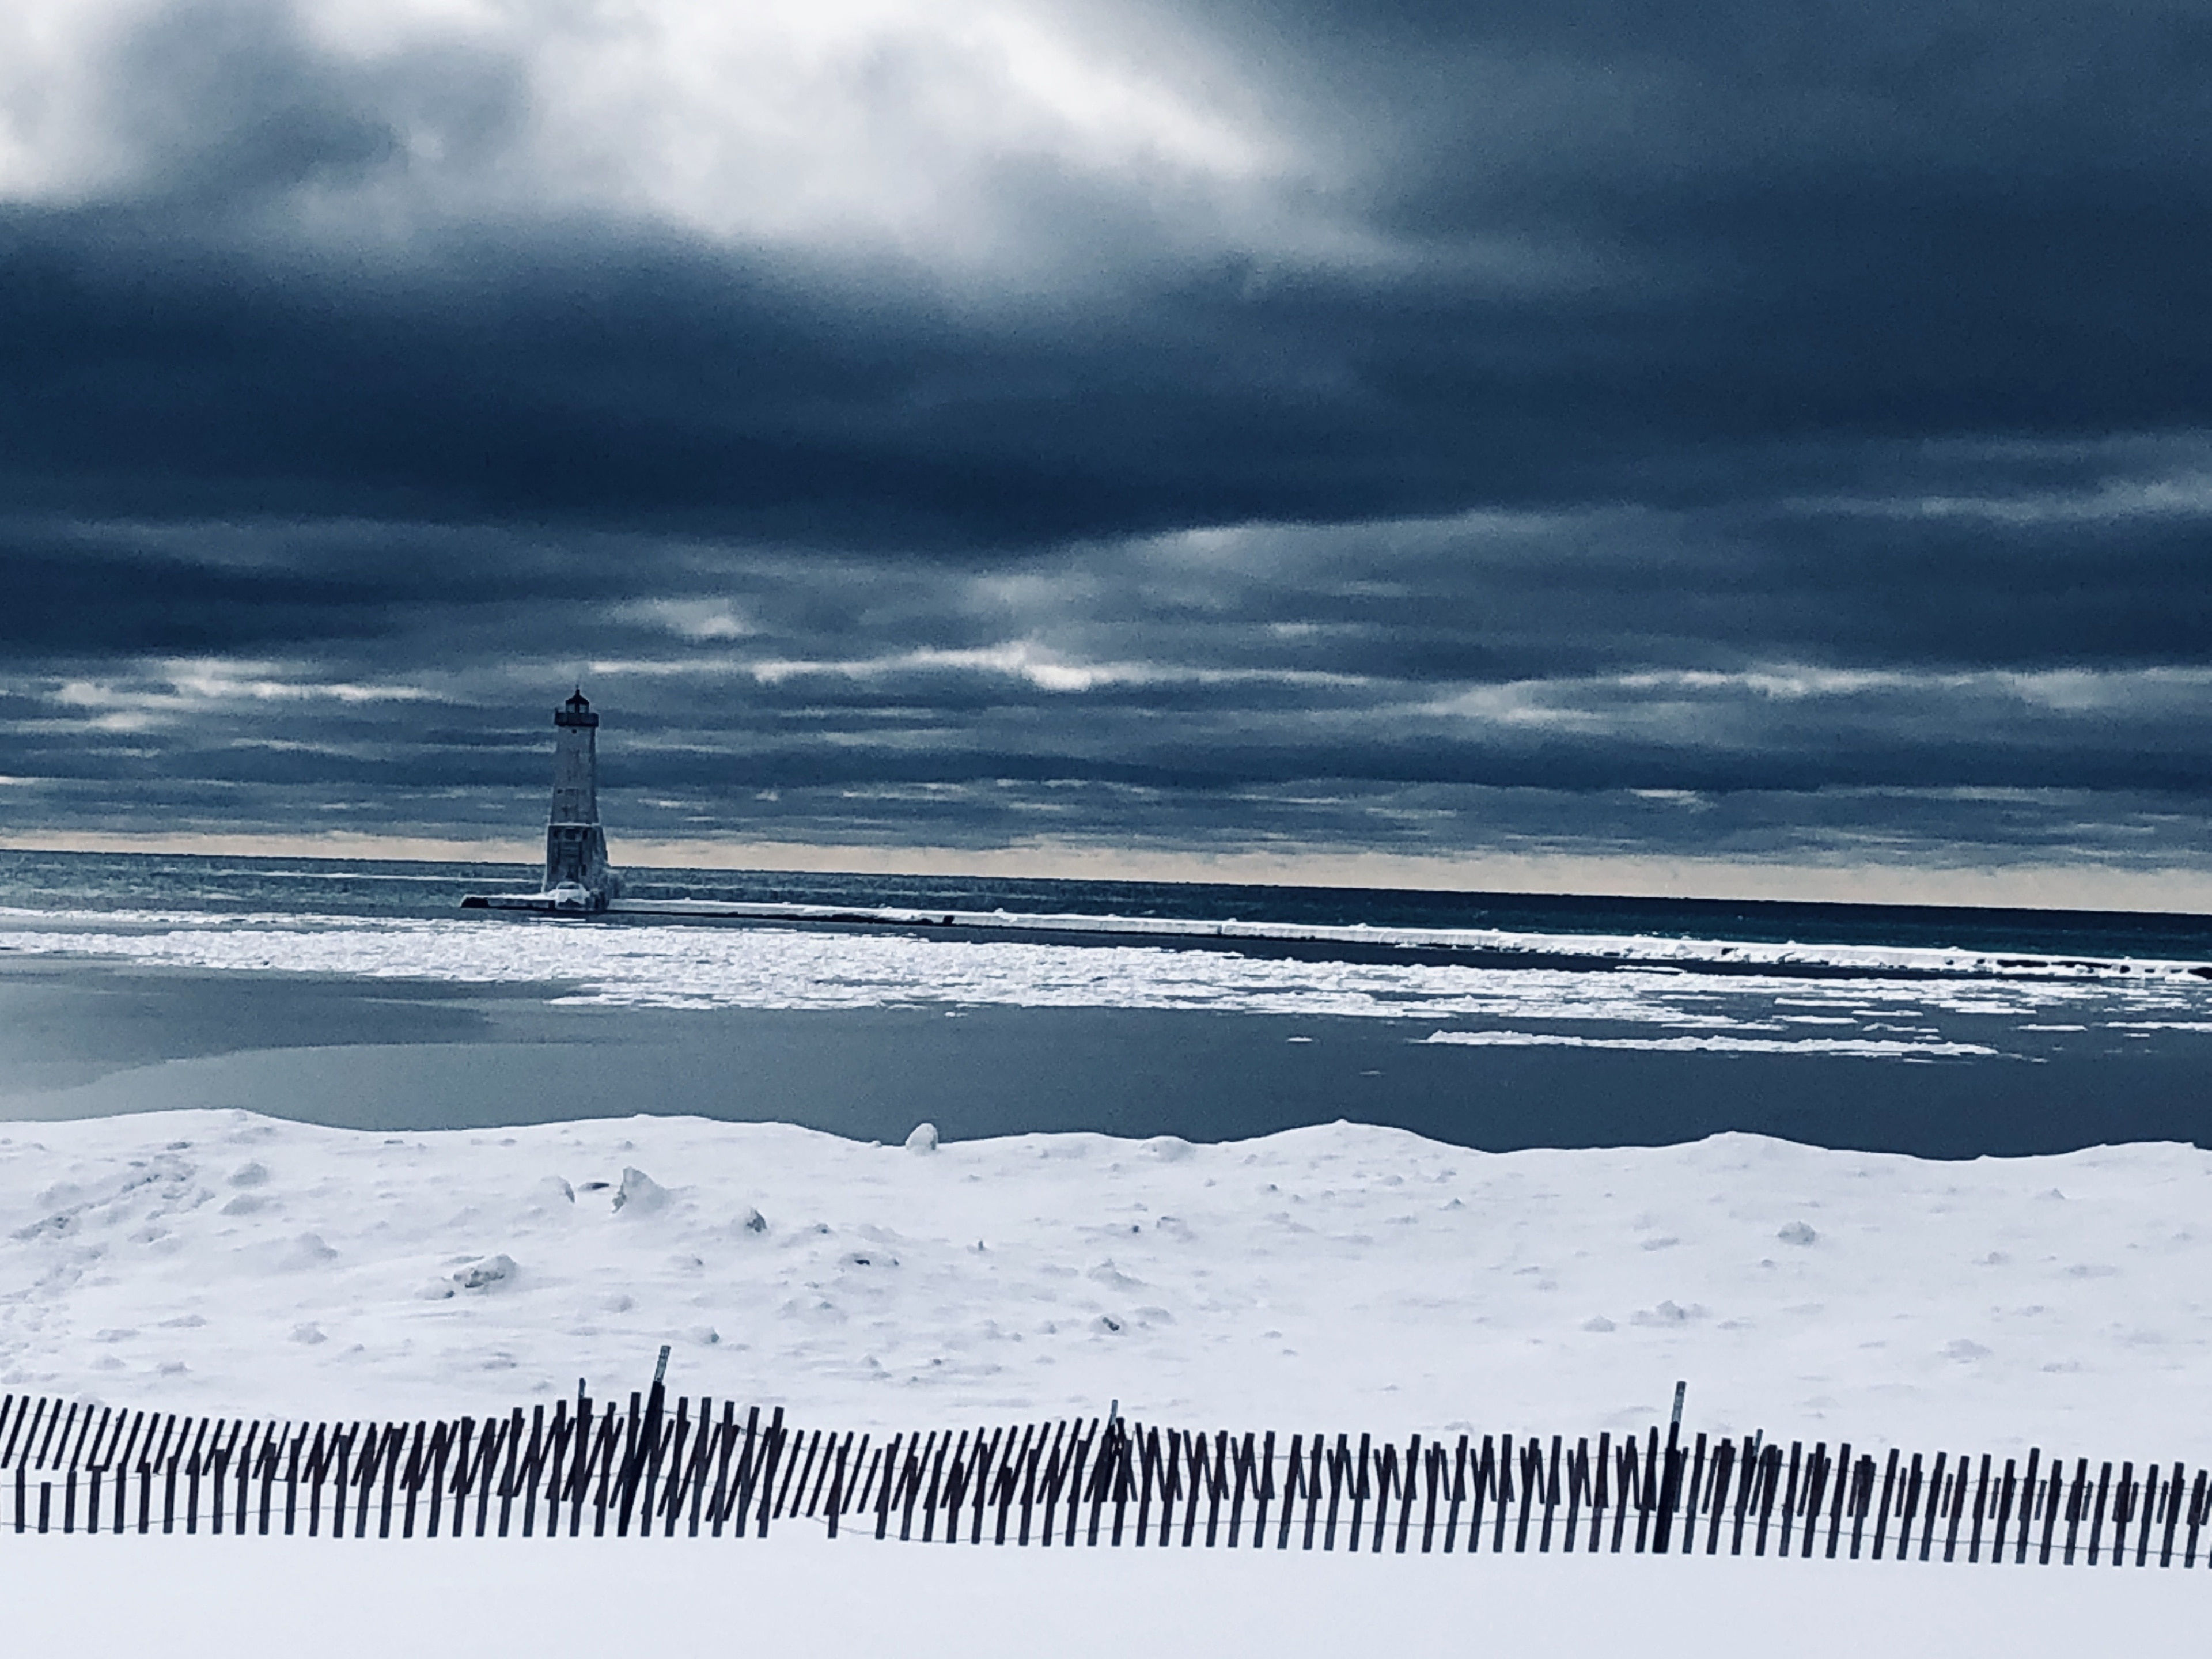 Lake Michigan is stunning in the winter months.